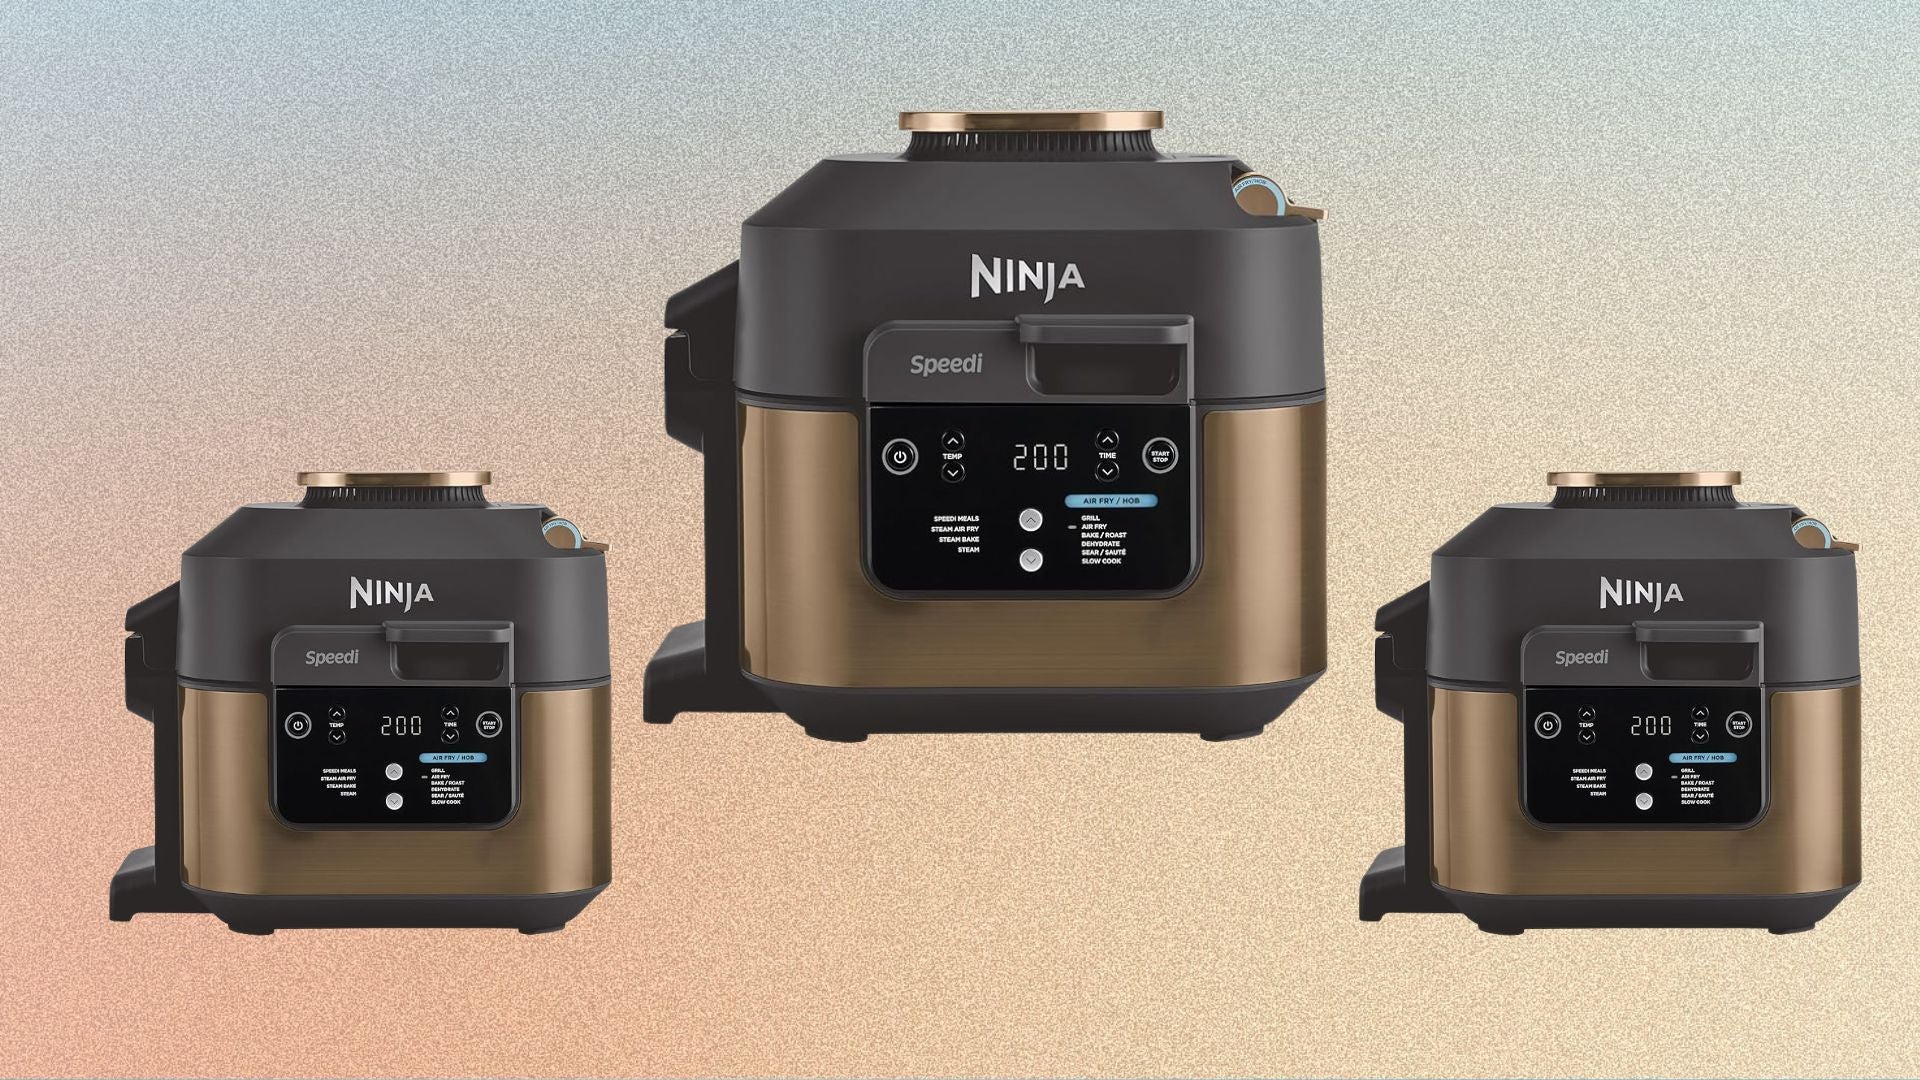 If you haven’t bought an air fryer yet, this Ninja deal will sway you